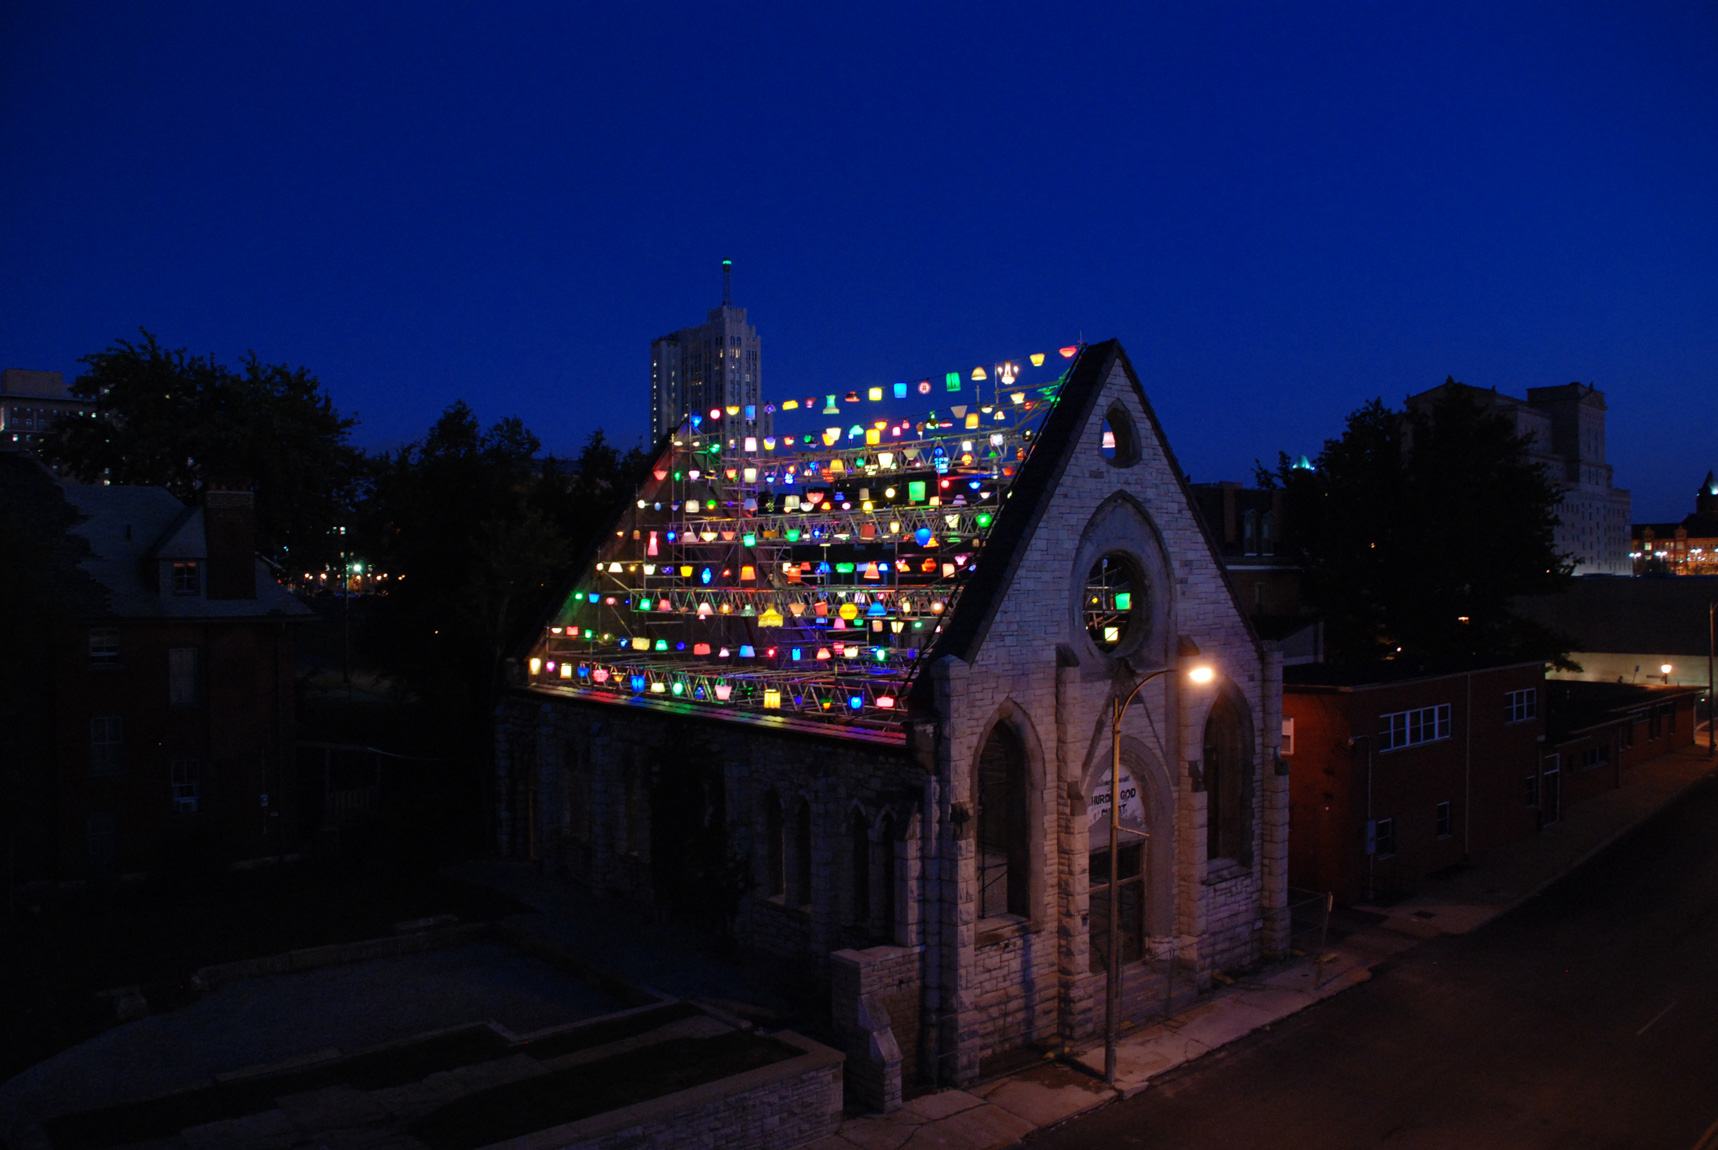 A nighttime view of the installation "CHORUS" by Rainer Kehres and Sebastian Hungerer set in the Spring Church. The piece is comprised of 300 lamps.